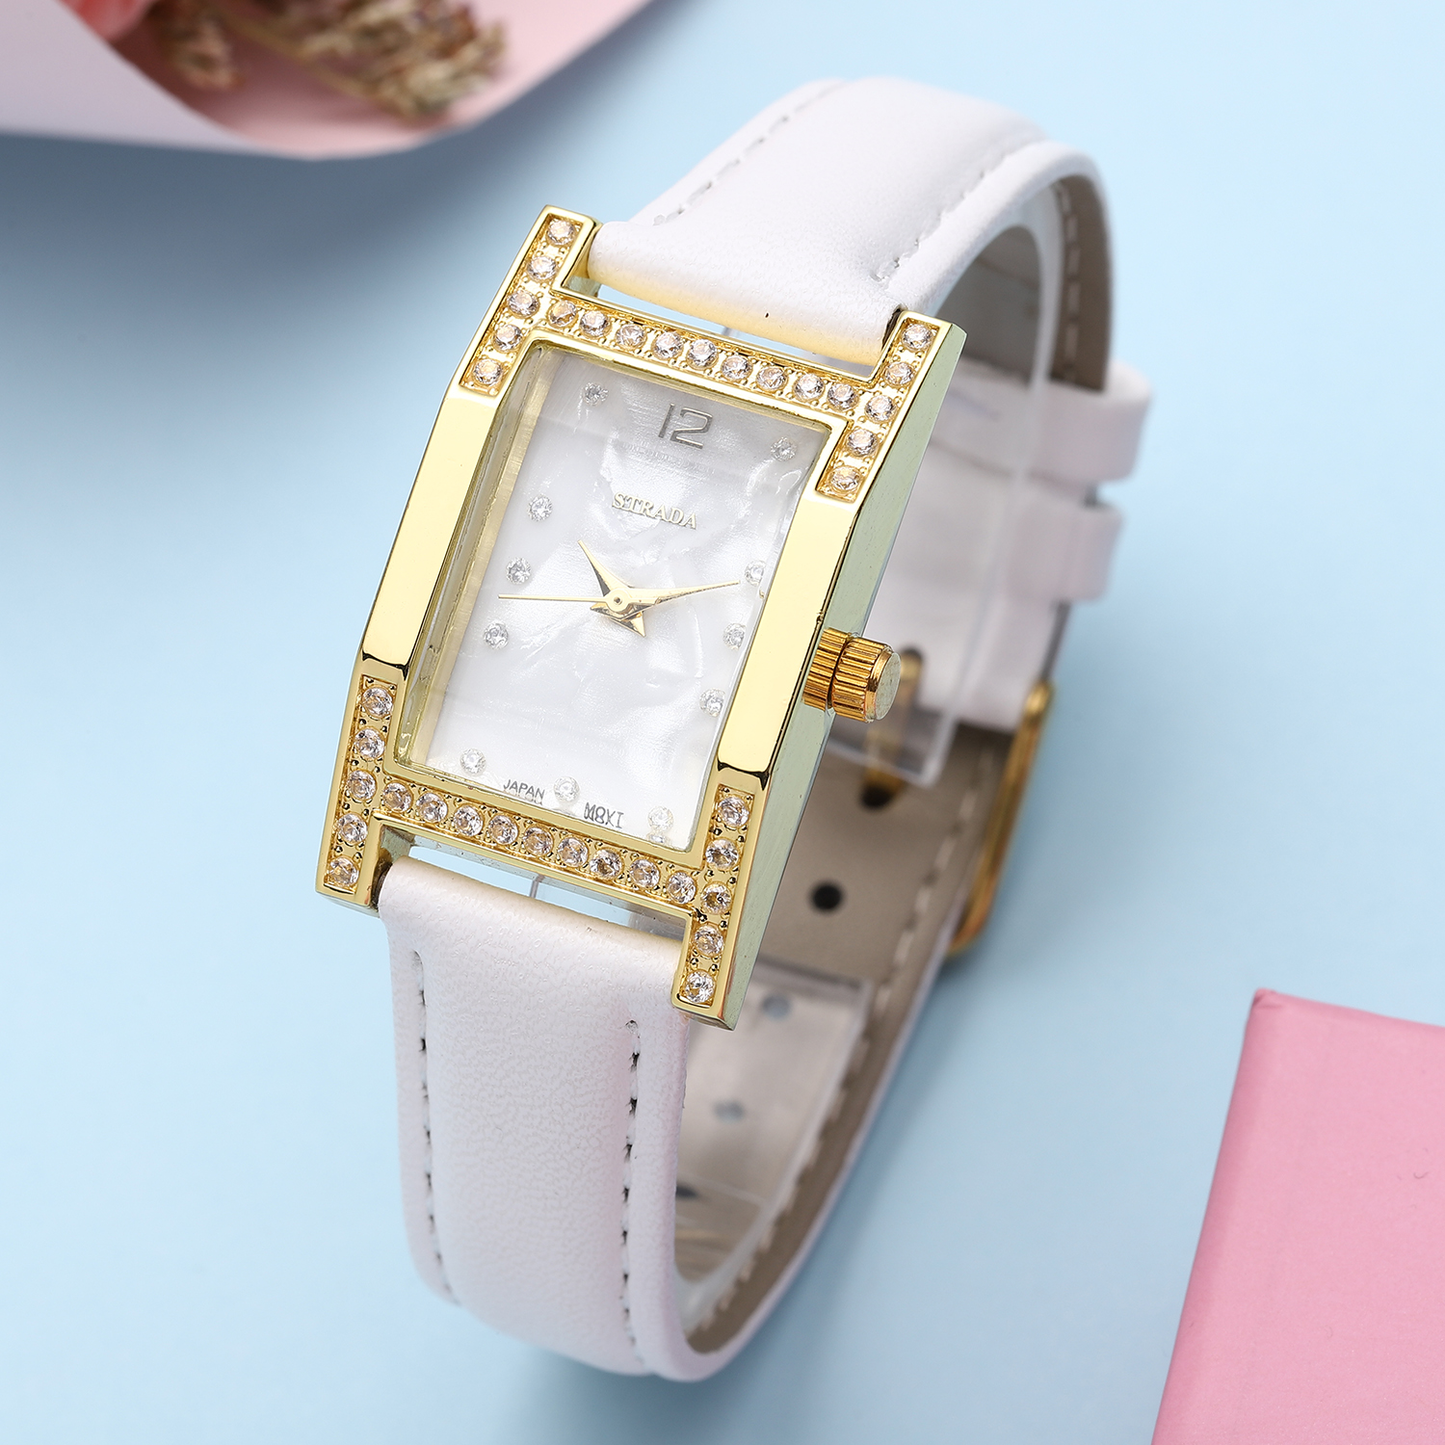 Simulated Diamond Watch with White Vegan Leather Strap